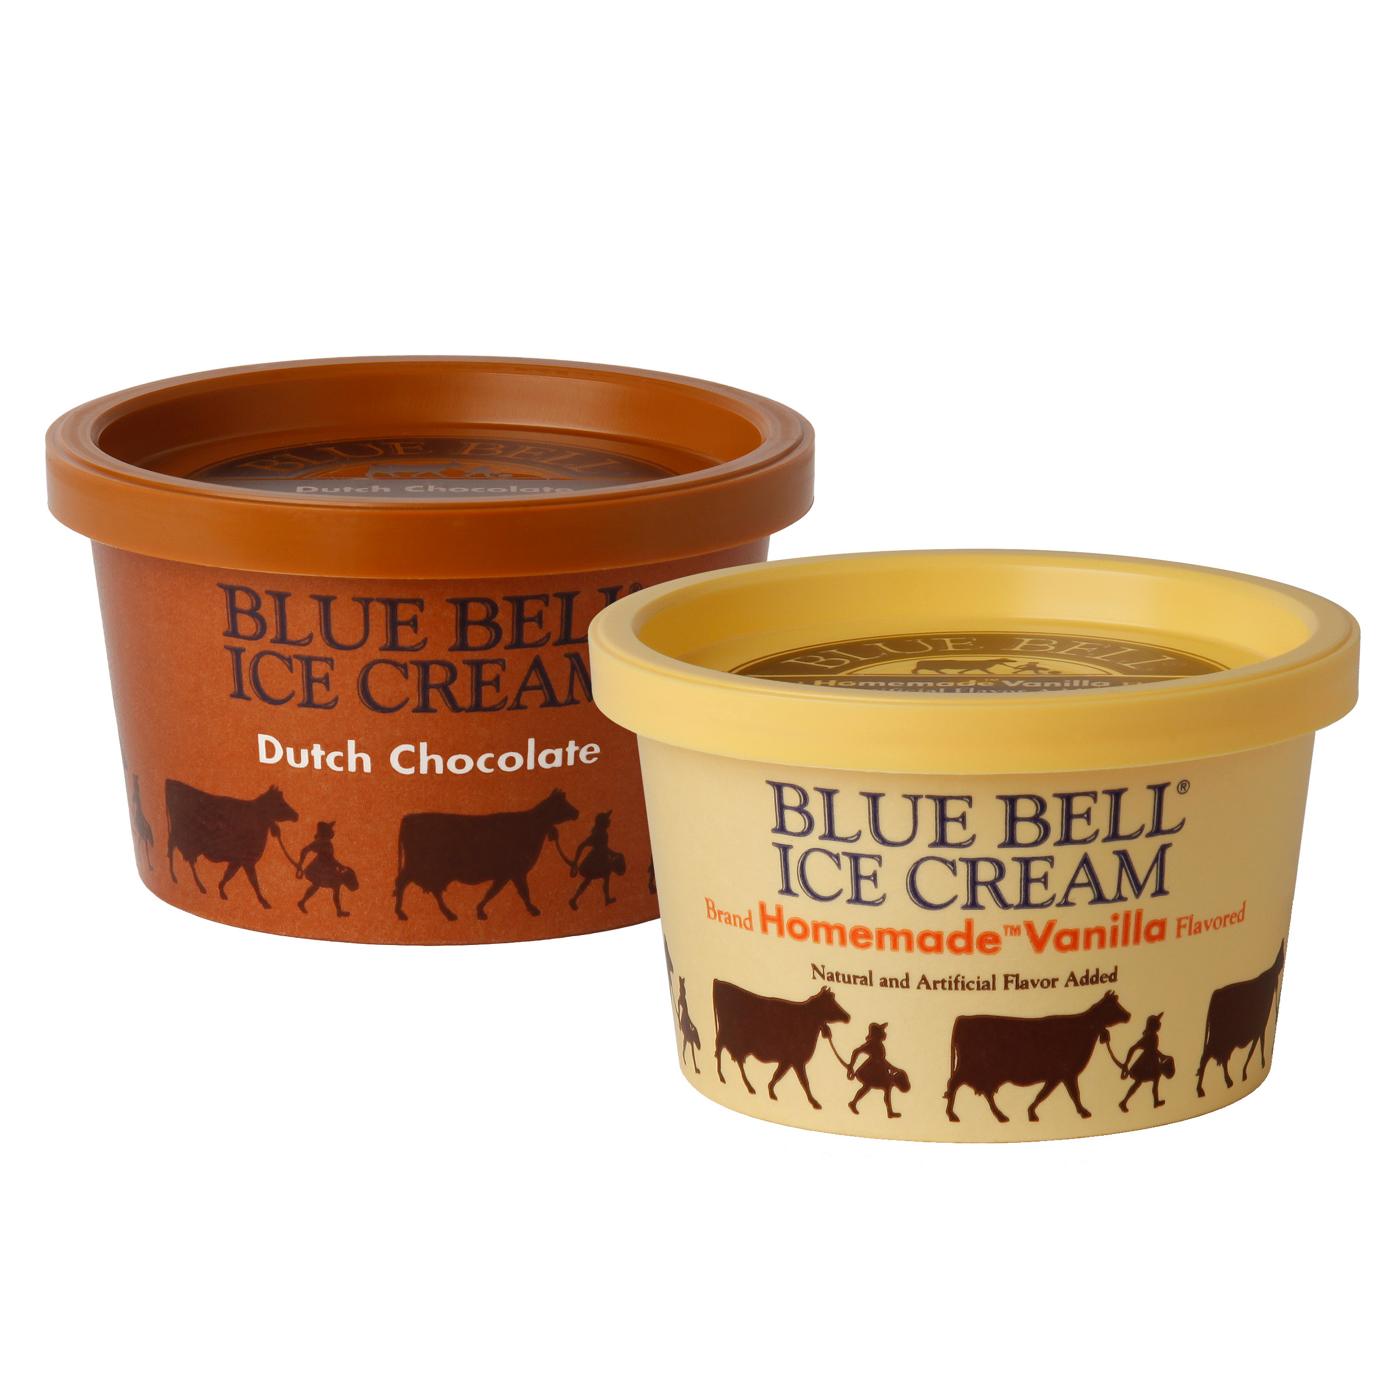 Blue Bell Dutch Chocolate and Homemade Vanilla Ice Cream Cups; image 2 of 3